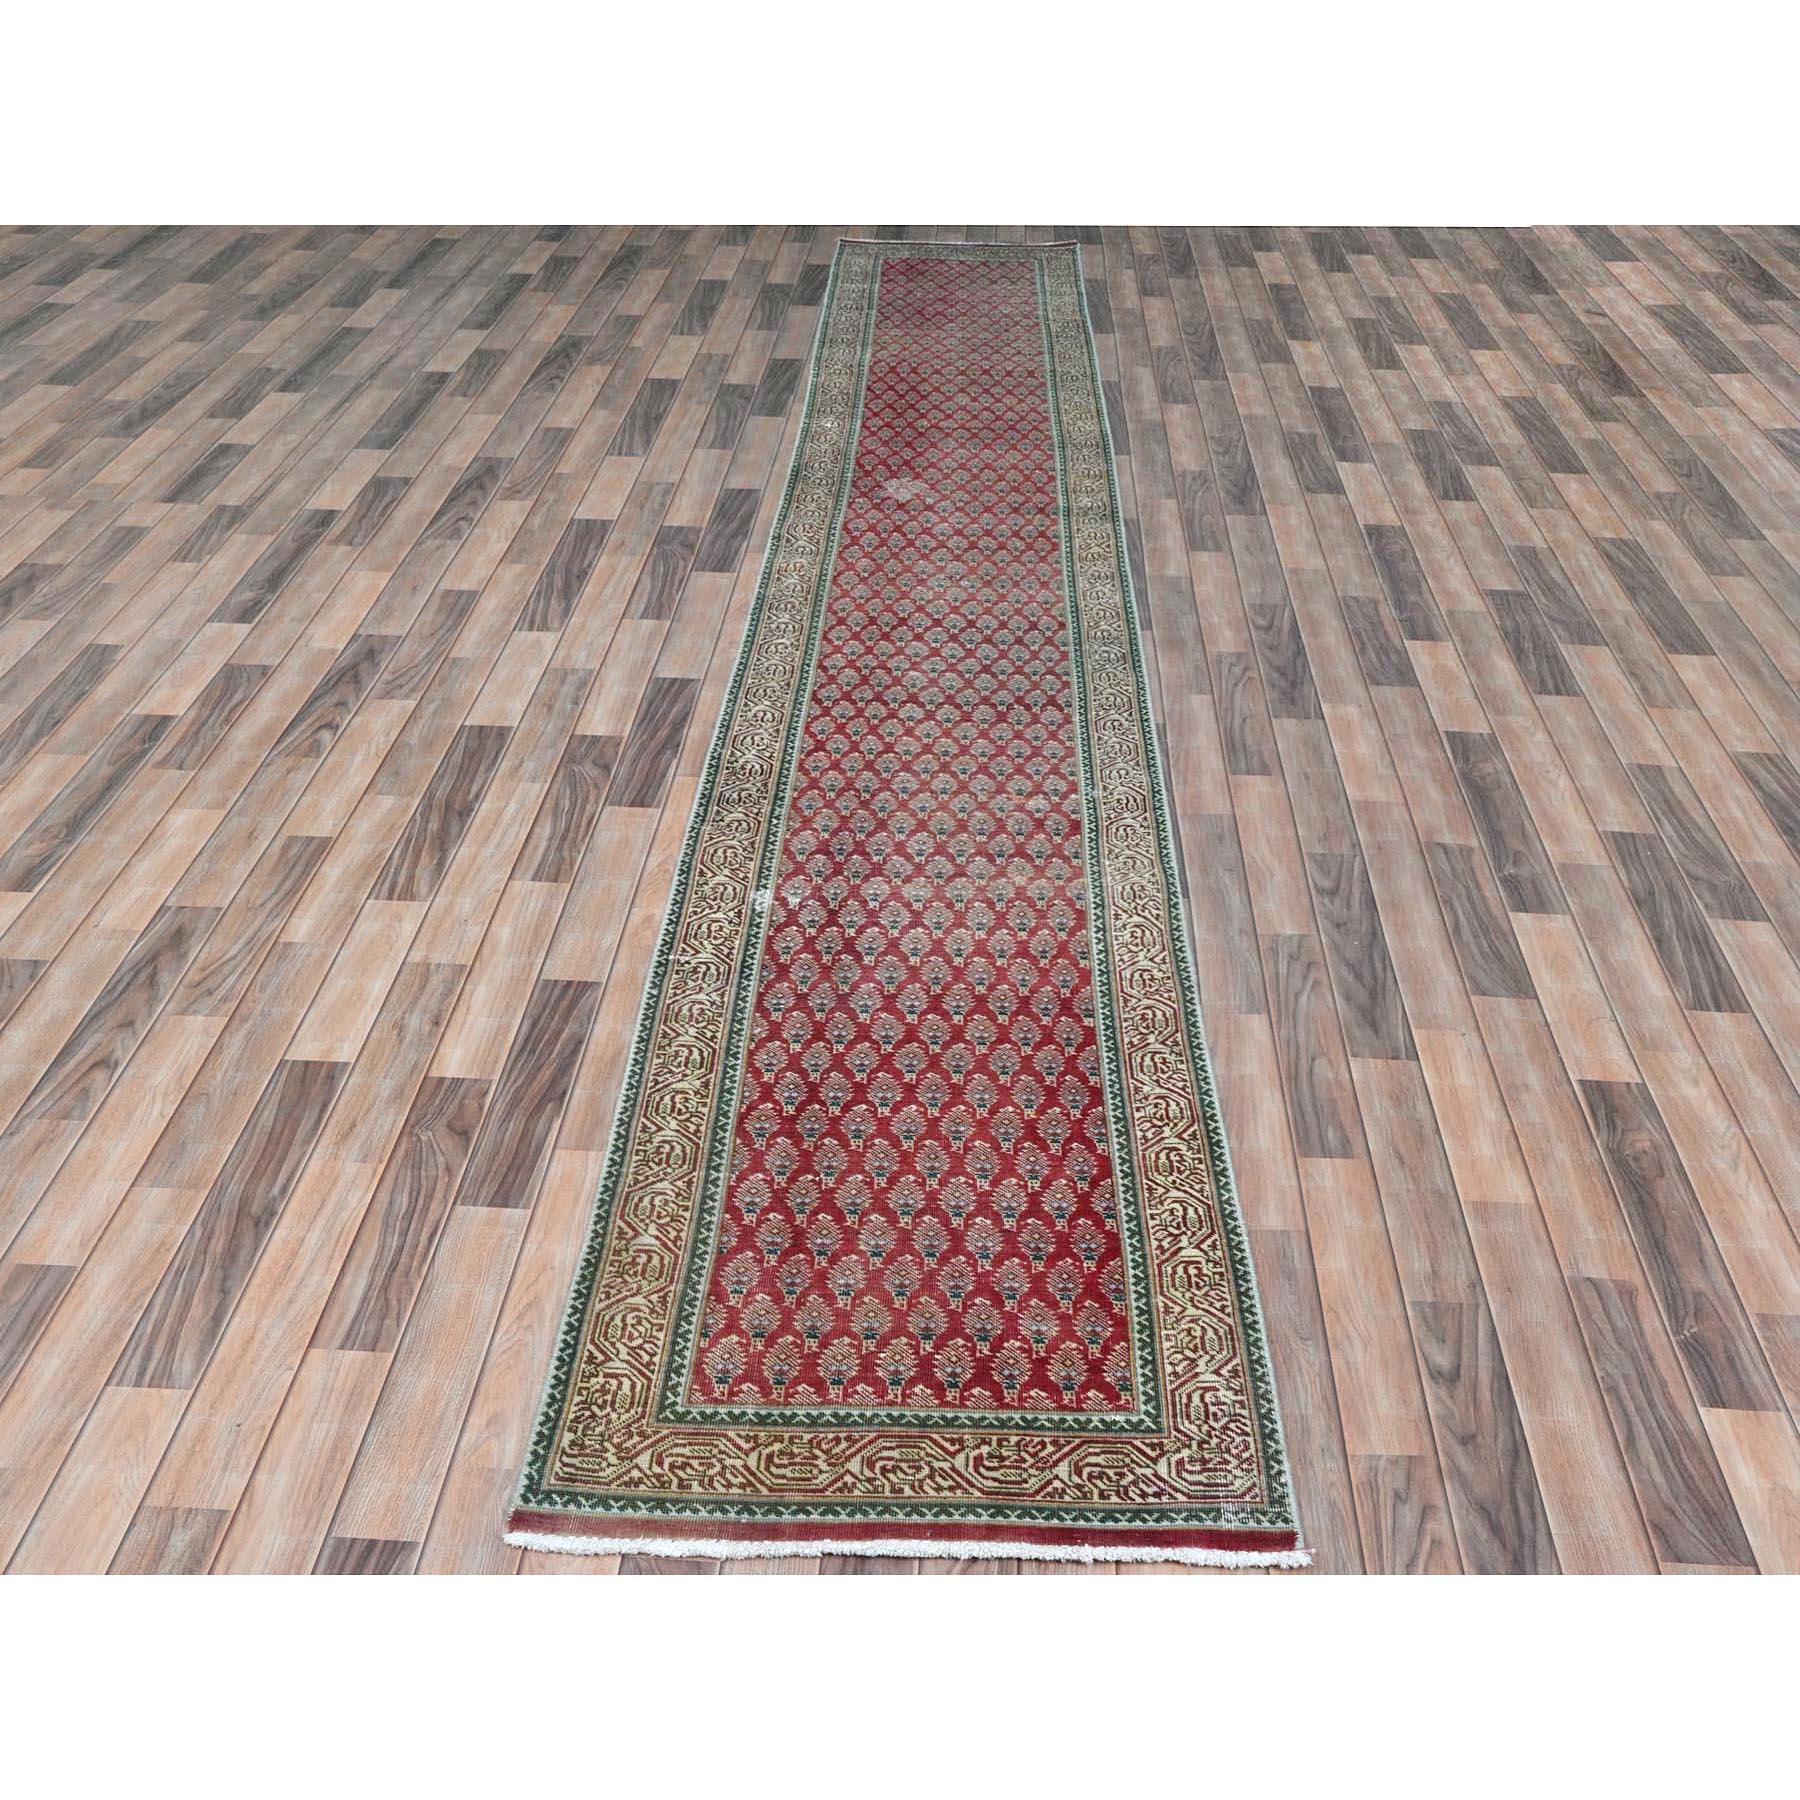 This fabulous Hand-Knotted carpet has been created and designed for extra strength and durability. This rug has been handcrafted for weeks in the traditional method that is used to make
Exact rug size in feet and inches : 2'5